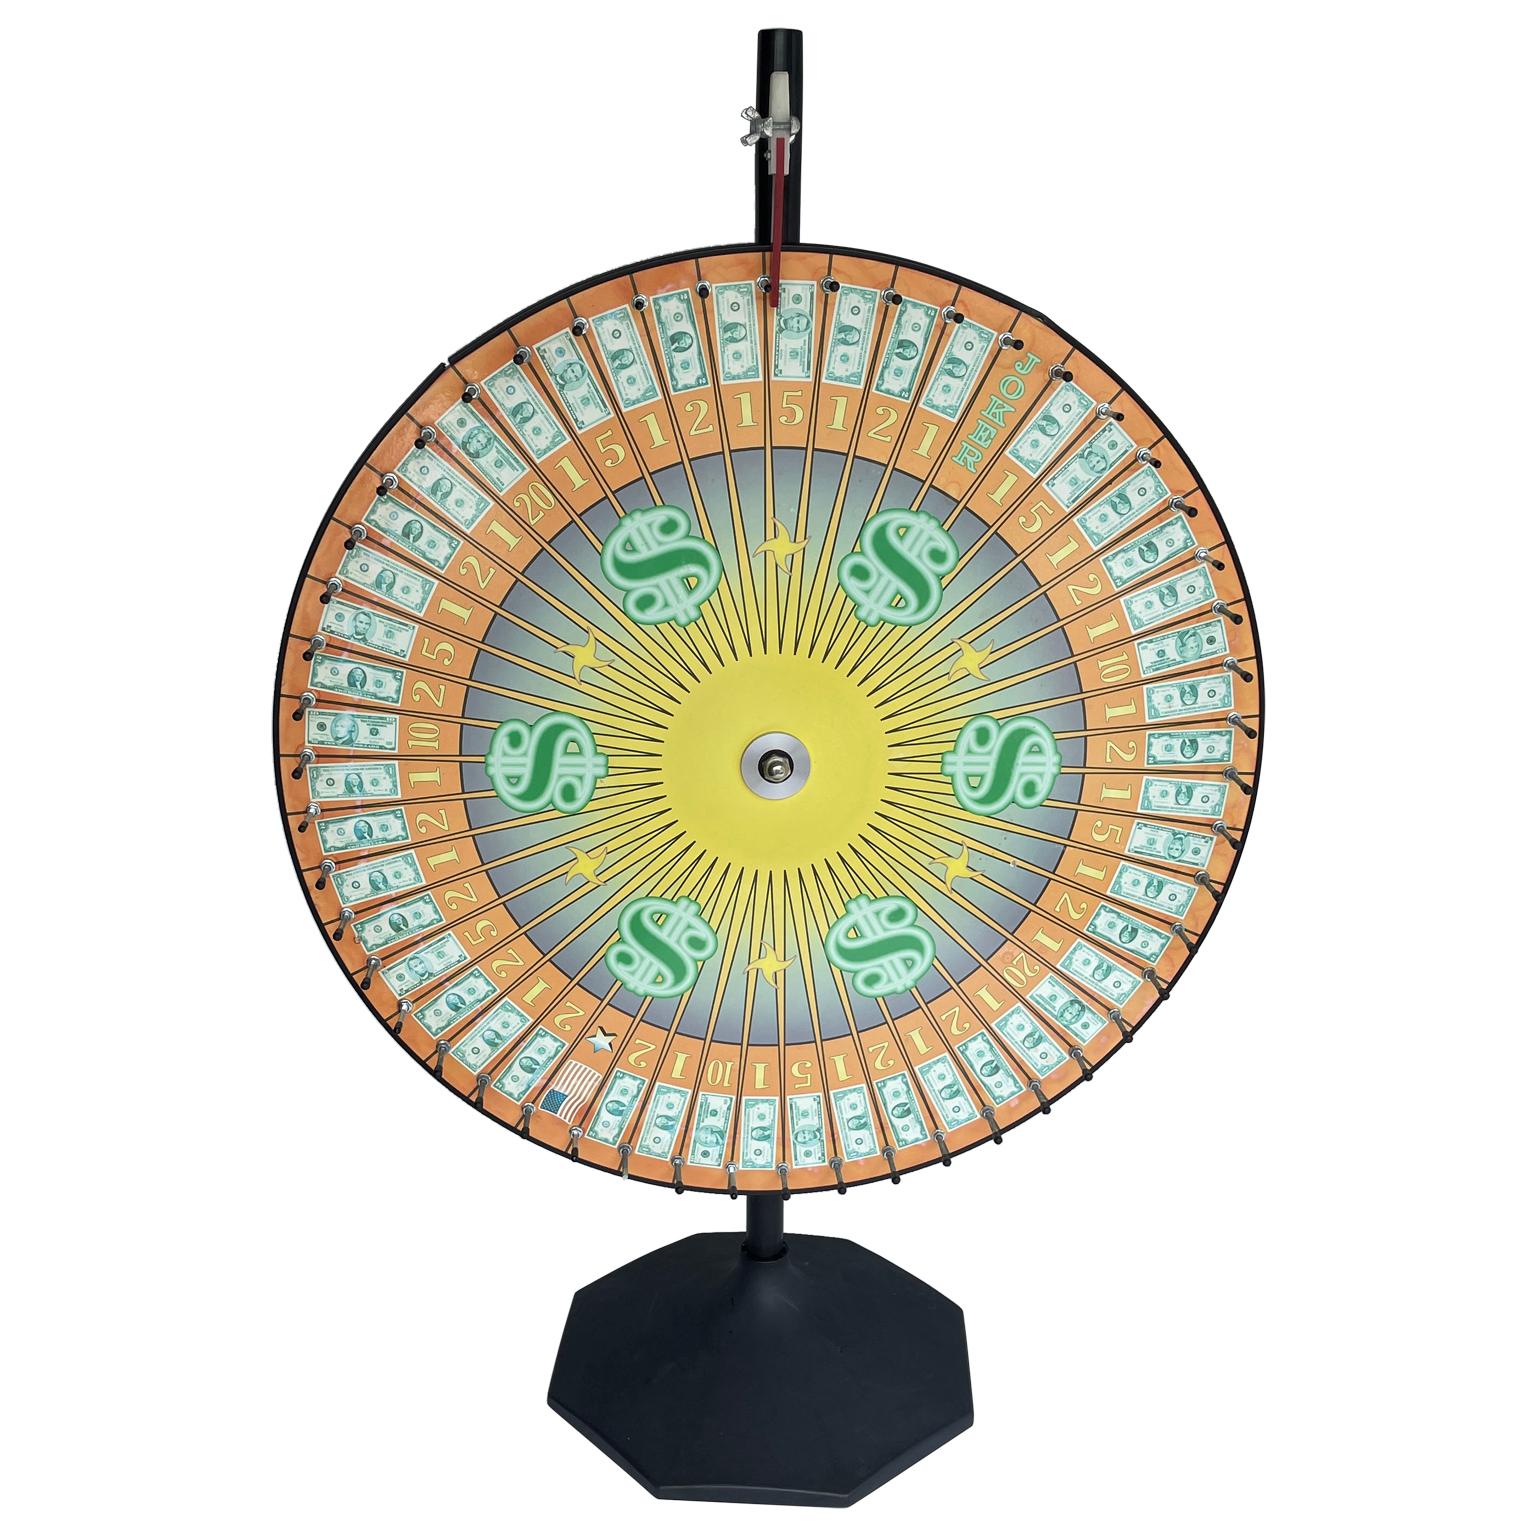 America stand alone gaming wheel of fortune, circa 1970's.
Mid-Century Modern gaming wheel manufactured by the Casino Supply Company. Yes, you need this in your game room. It's bright and shiny with big dollar signs on the front. All pegs are in